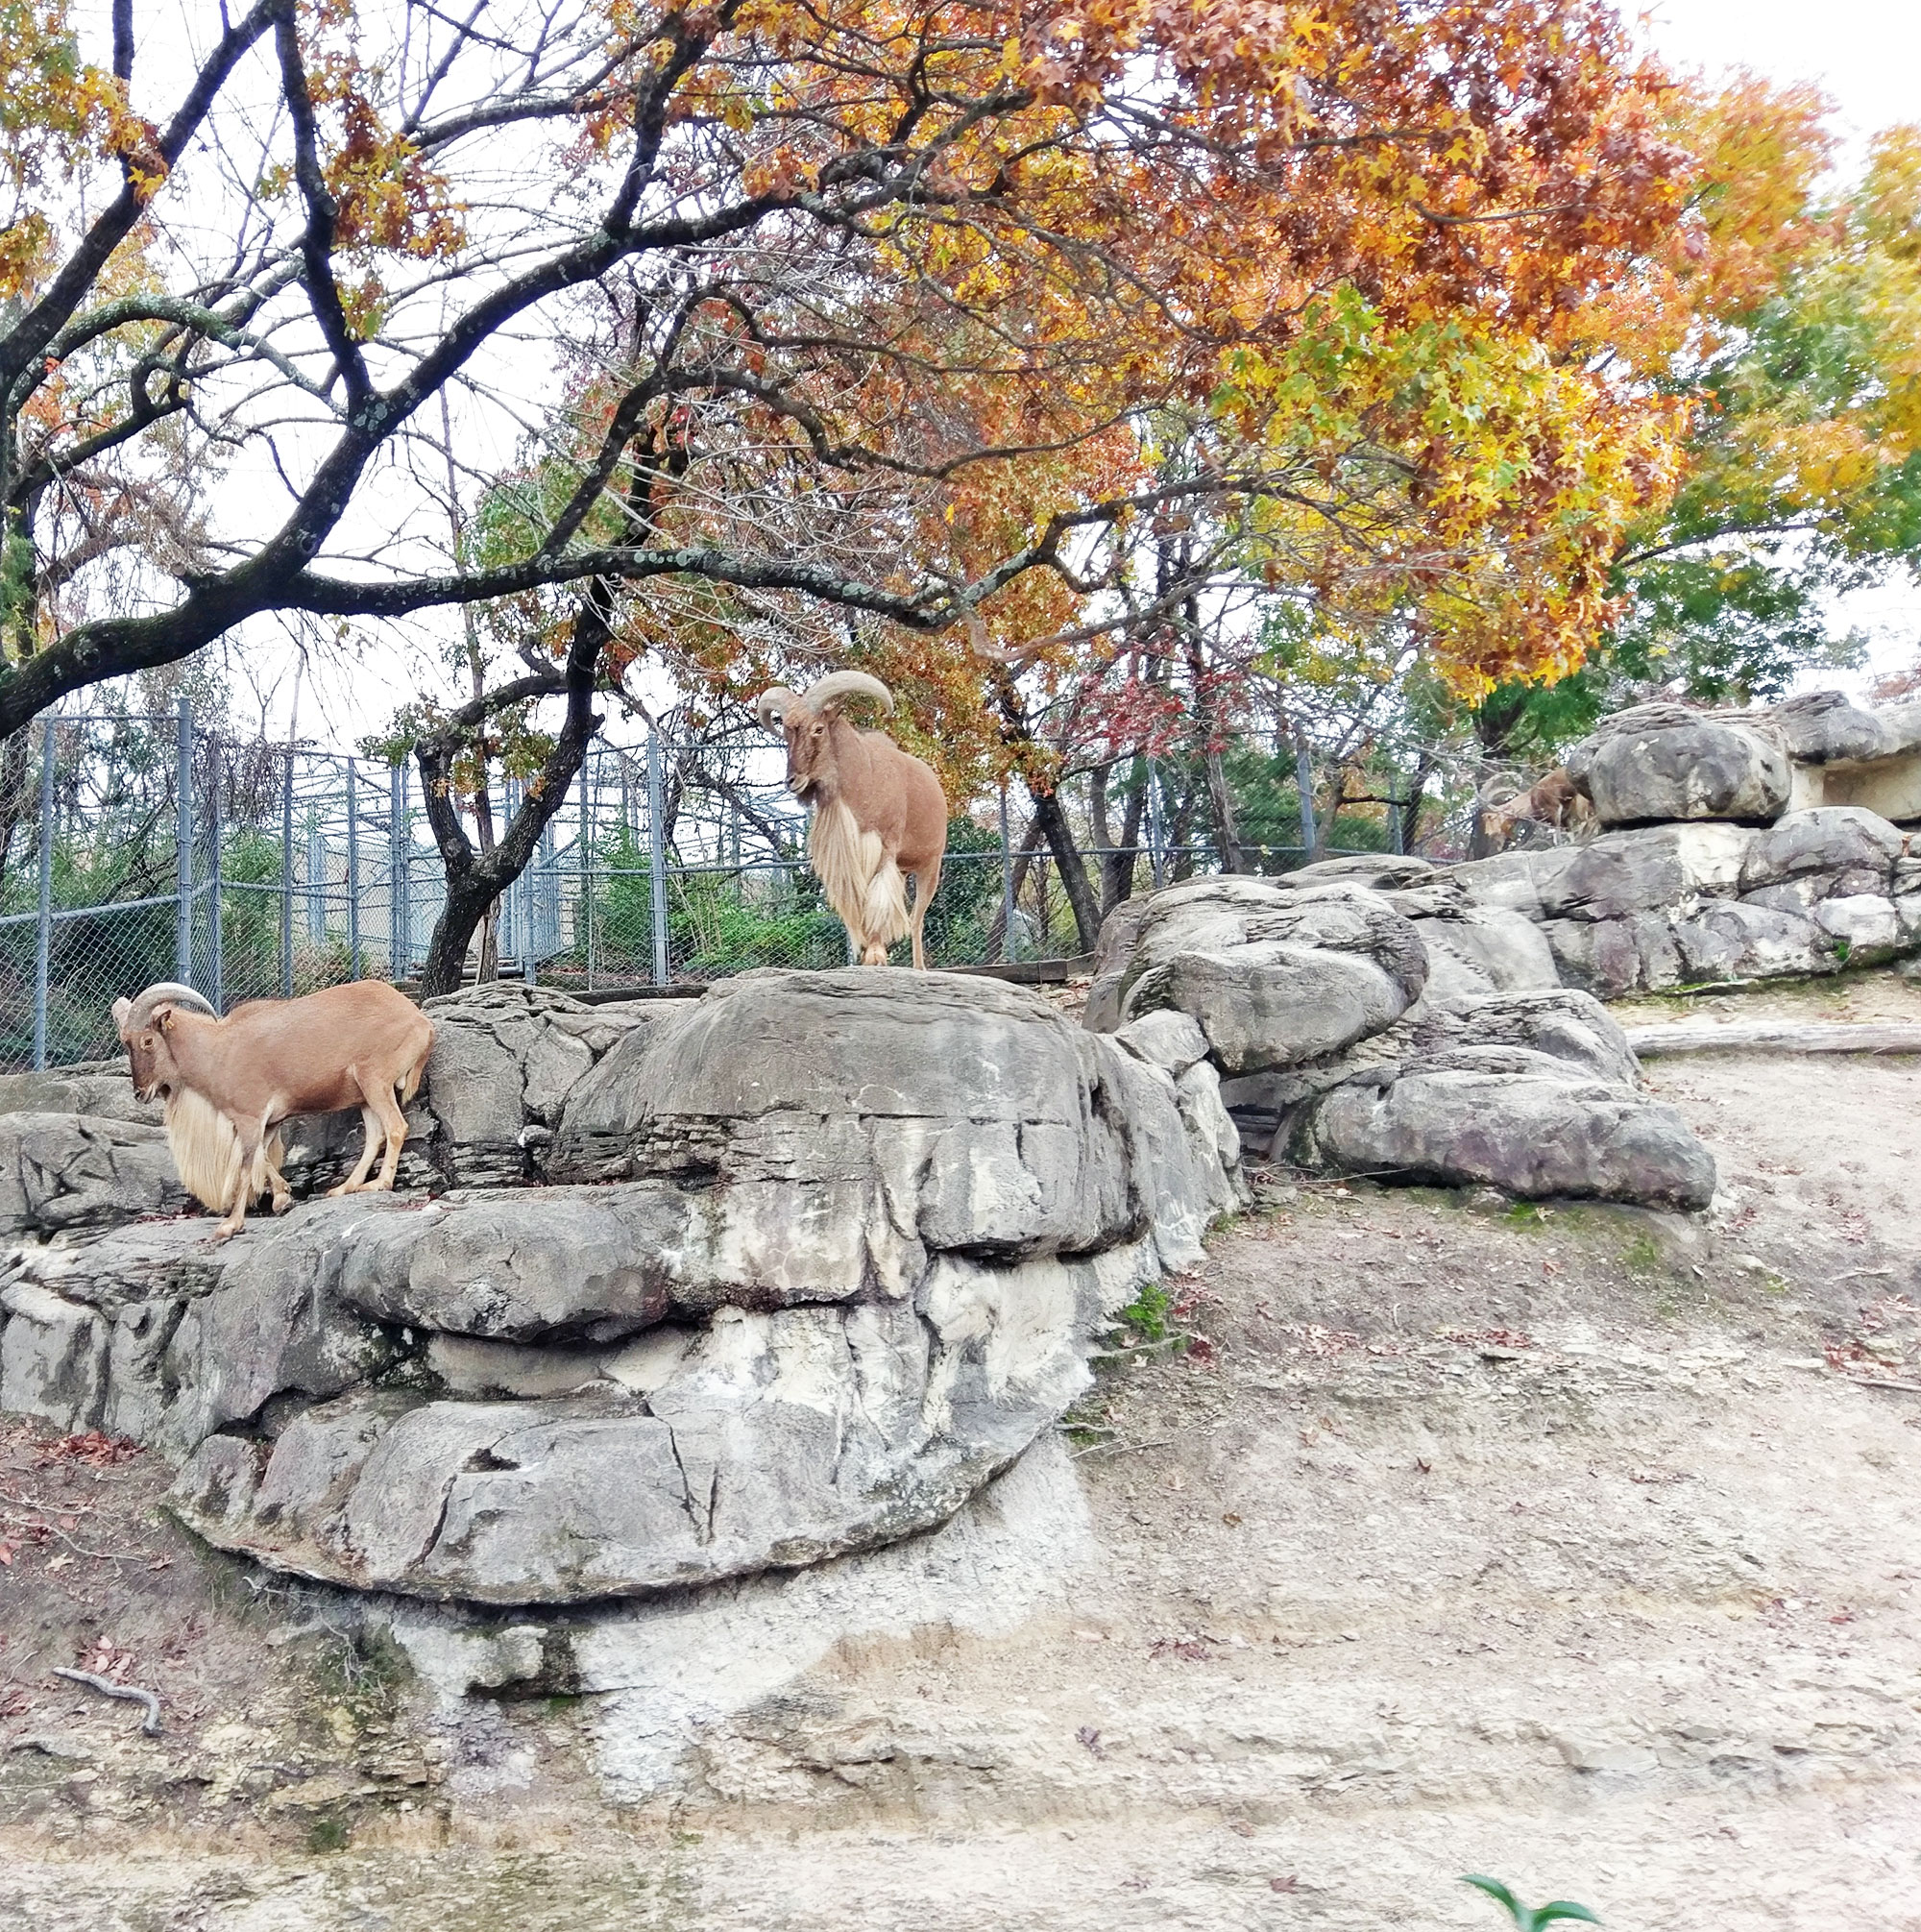 African Mountain Goats at the Dallas Zoo.